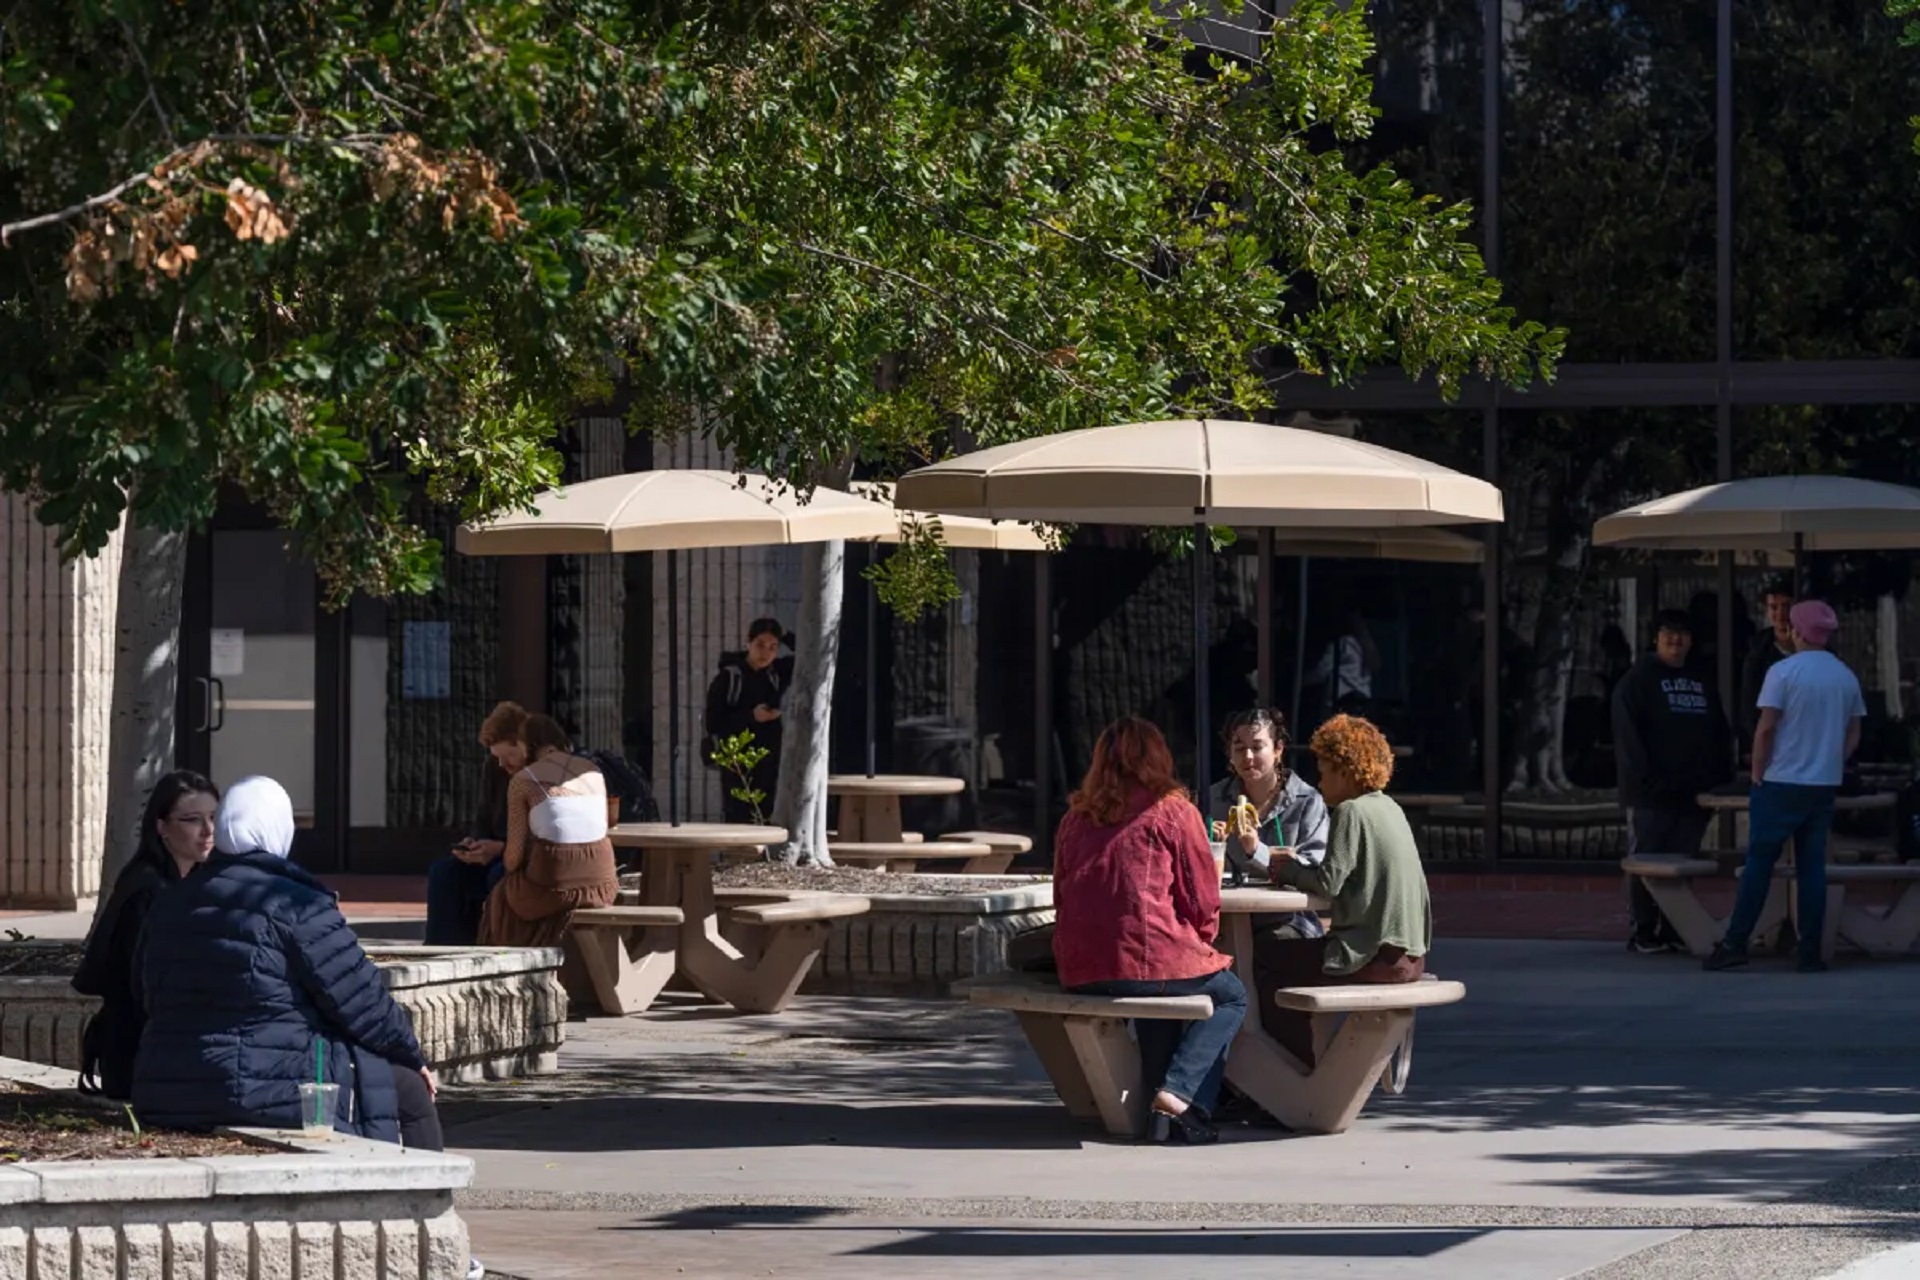 A college campus quad area with circular tables with umbrellas are scattered about. Large planters with trees growing inside shade students sitting in pairs chatting between classes.